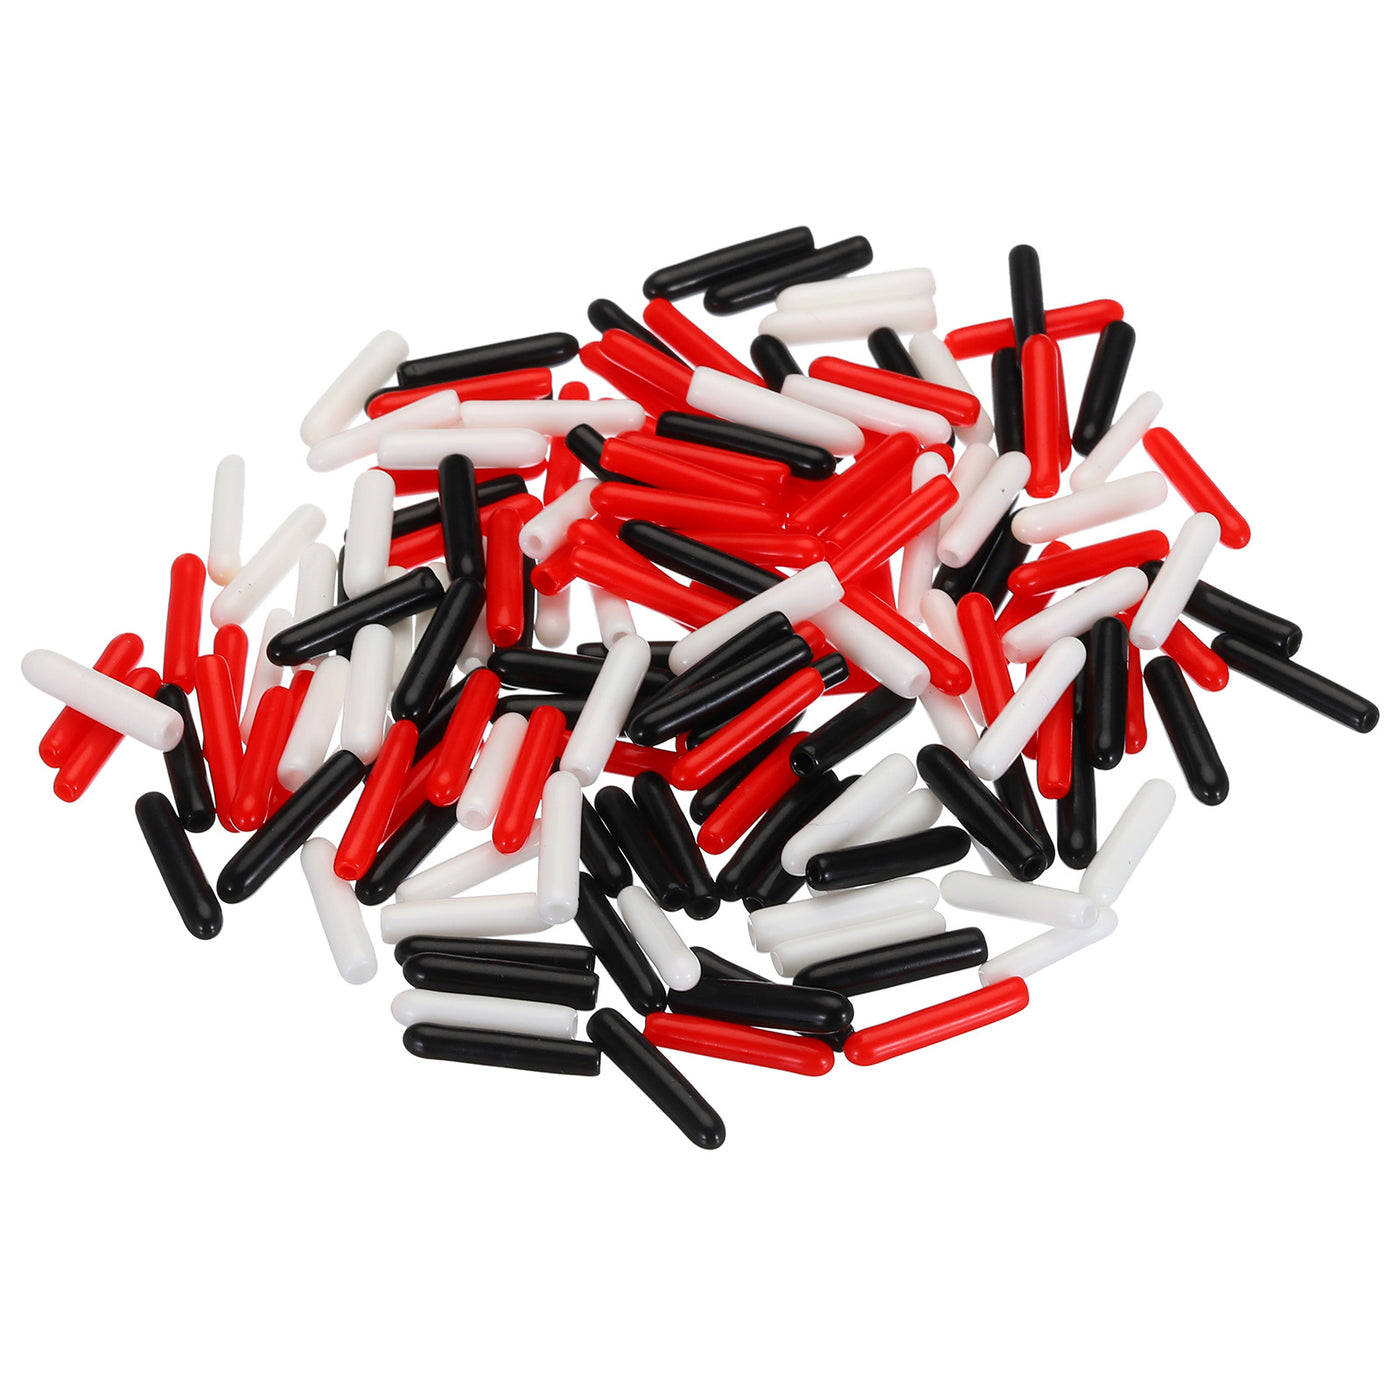 uxcell Uxcell 300pcs Rubber End Caps 2.5mm ID Vinyl Round Tube Bolt Cap Cover Screw Thread Protectors Black, Red, White